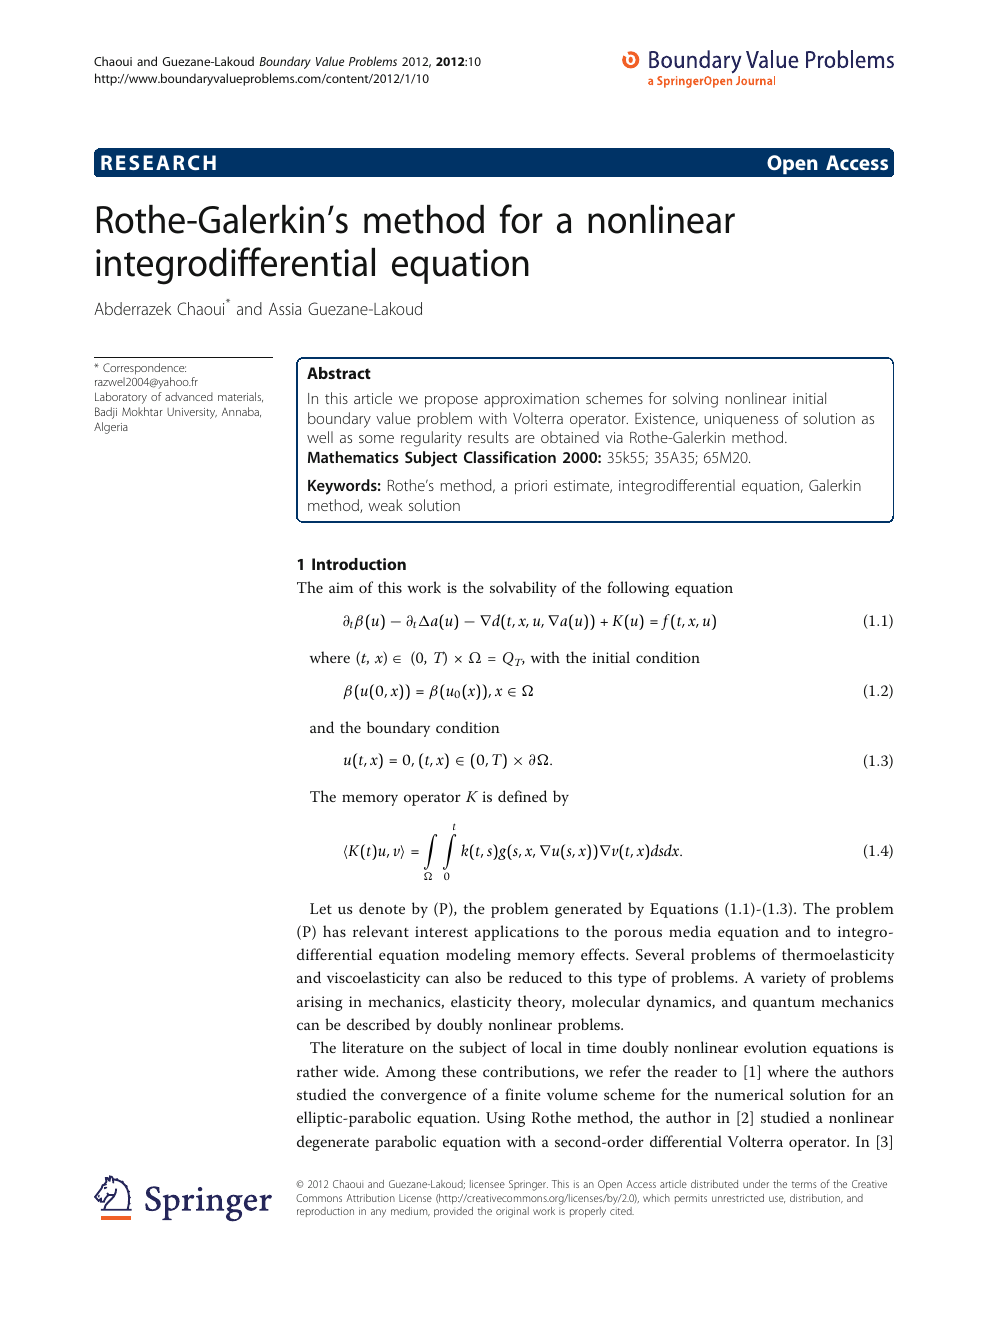 Rothe Galerkin S Method For Nonlinear Integrodifferential Equations Topic Of Research Paper In Mathematics Download Scholarly Article Pdf And Read For Free On Cyberleninka Open Science Hub